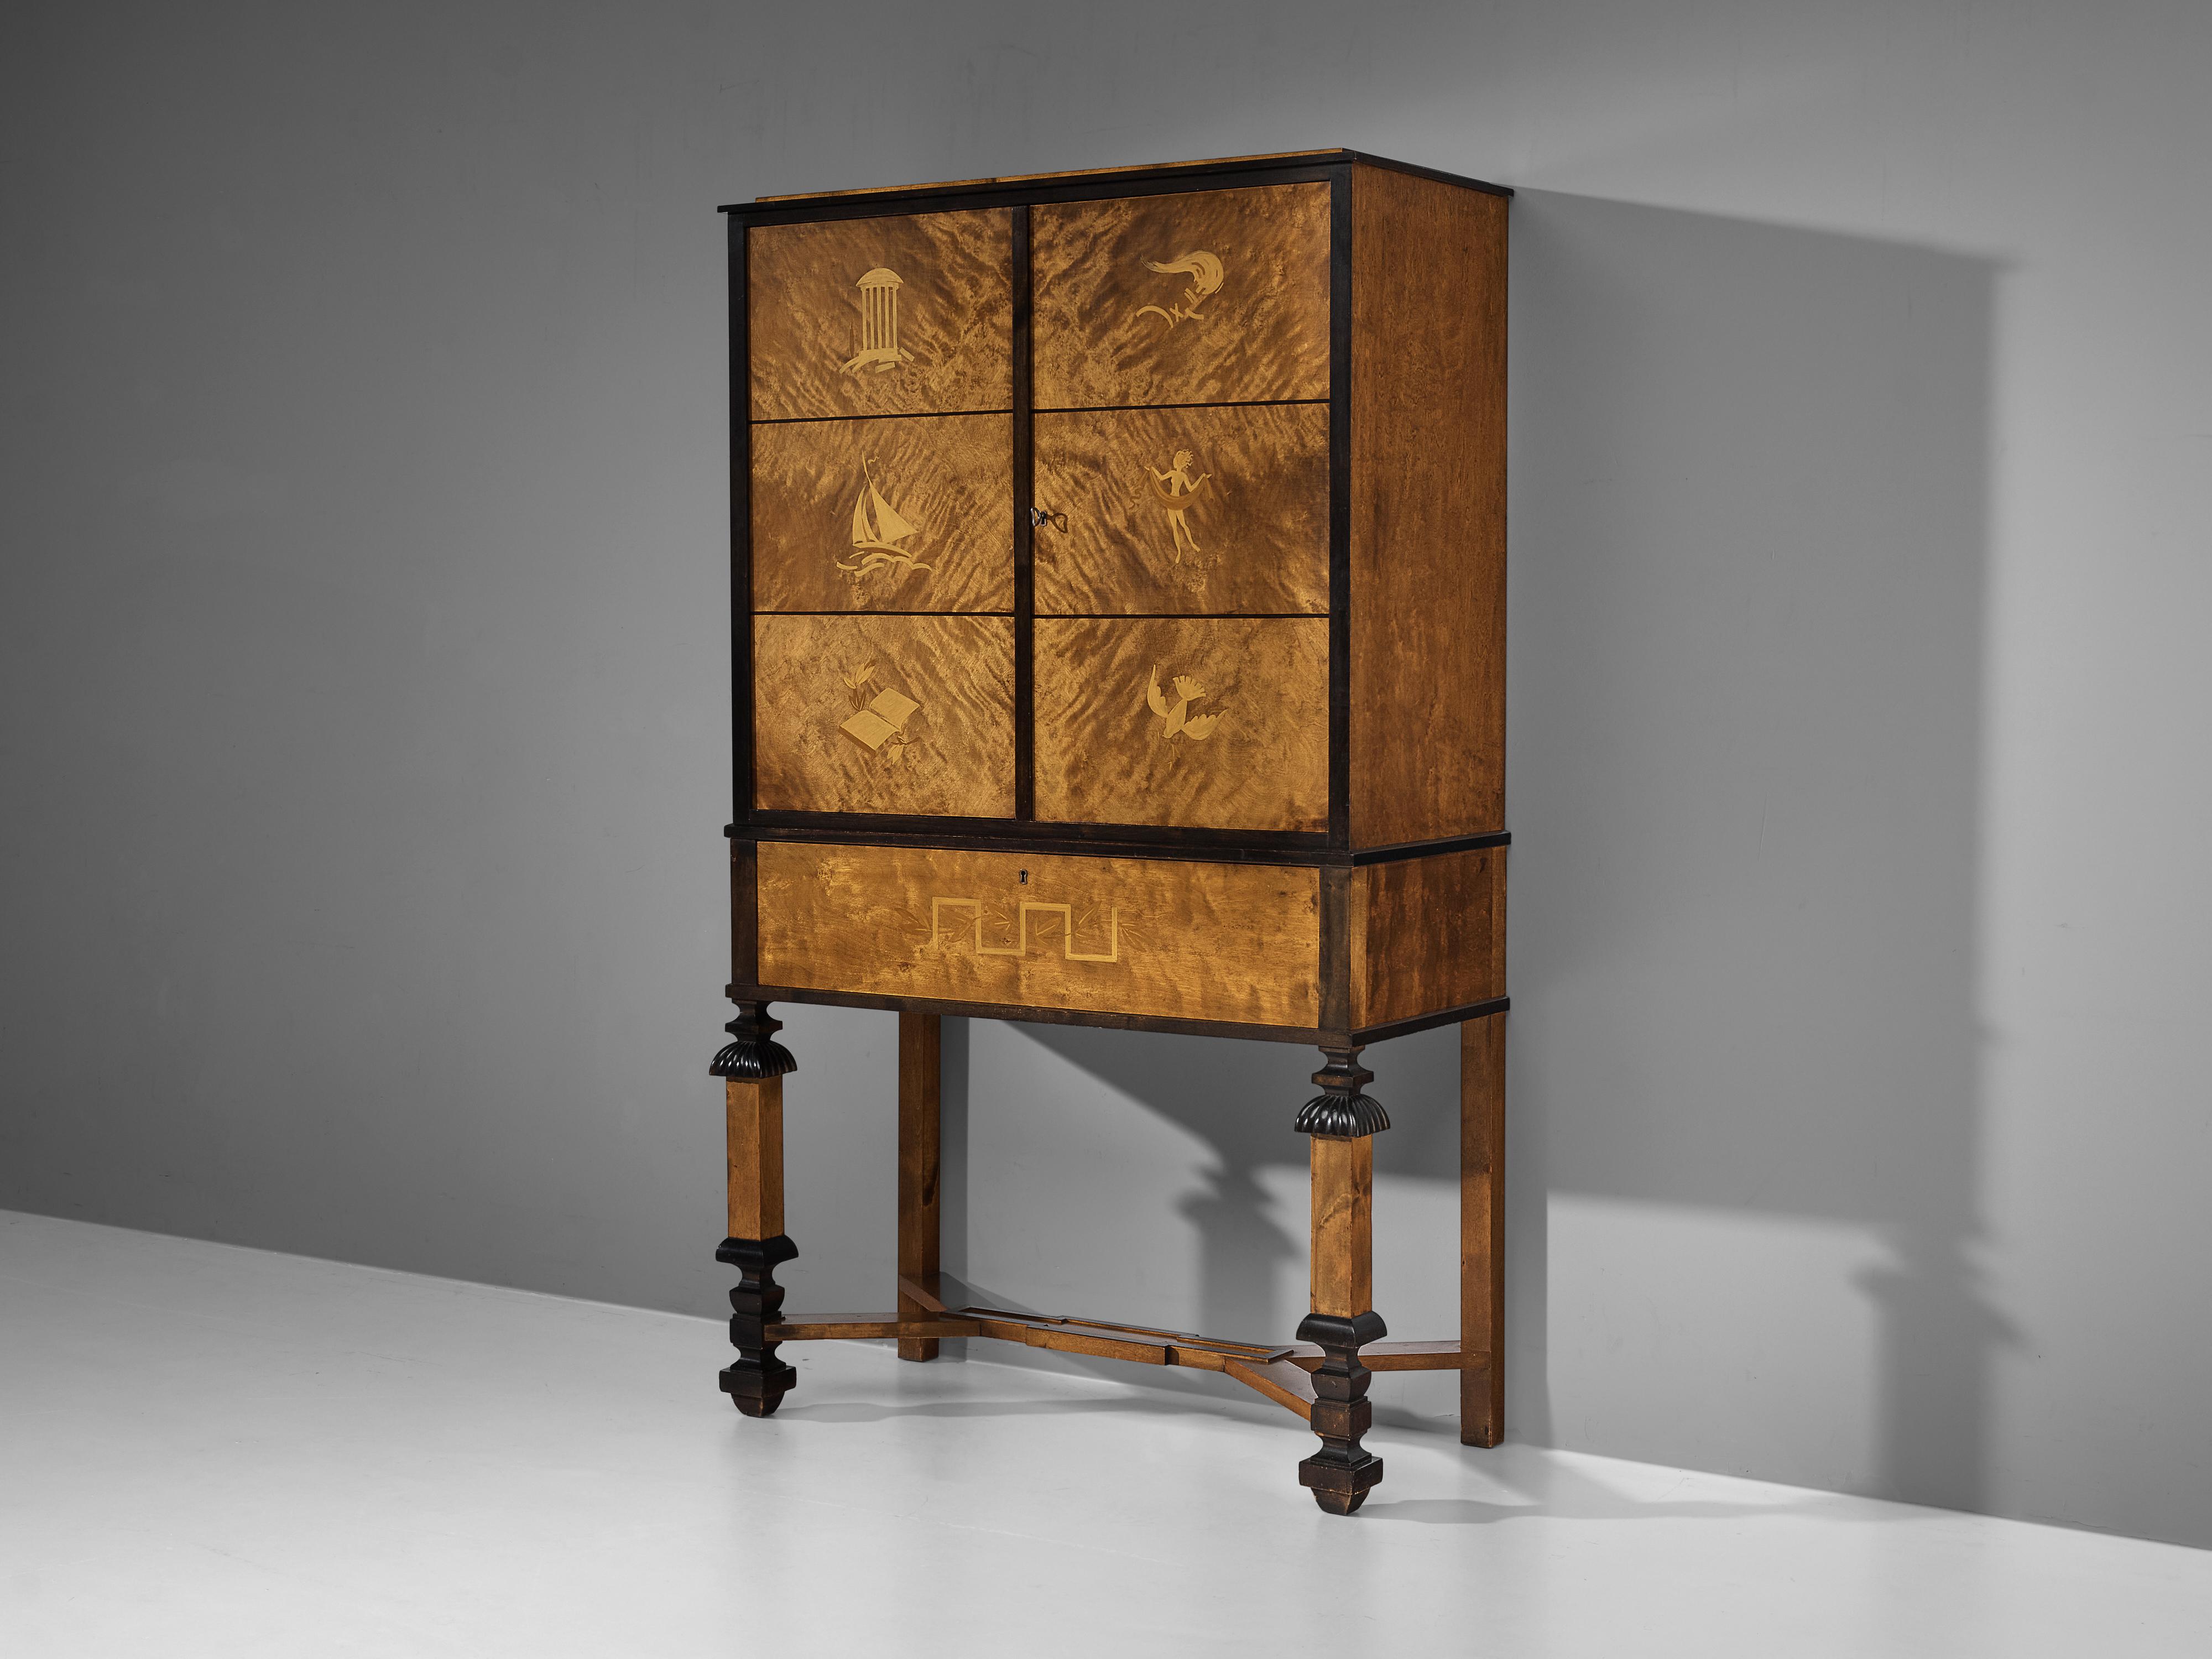 Cabinet, birch, brass, Sweden, 1920s

Excellent Swedish cabinet in the so-called Swedish Grace style. The elegantly structured cabinet in curly birch has two front doors above a drawer. The doors are visually divided in three fields each. An